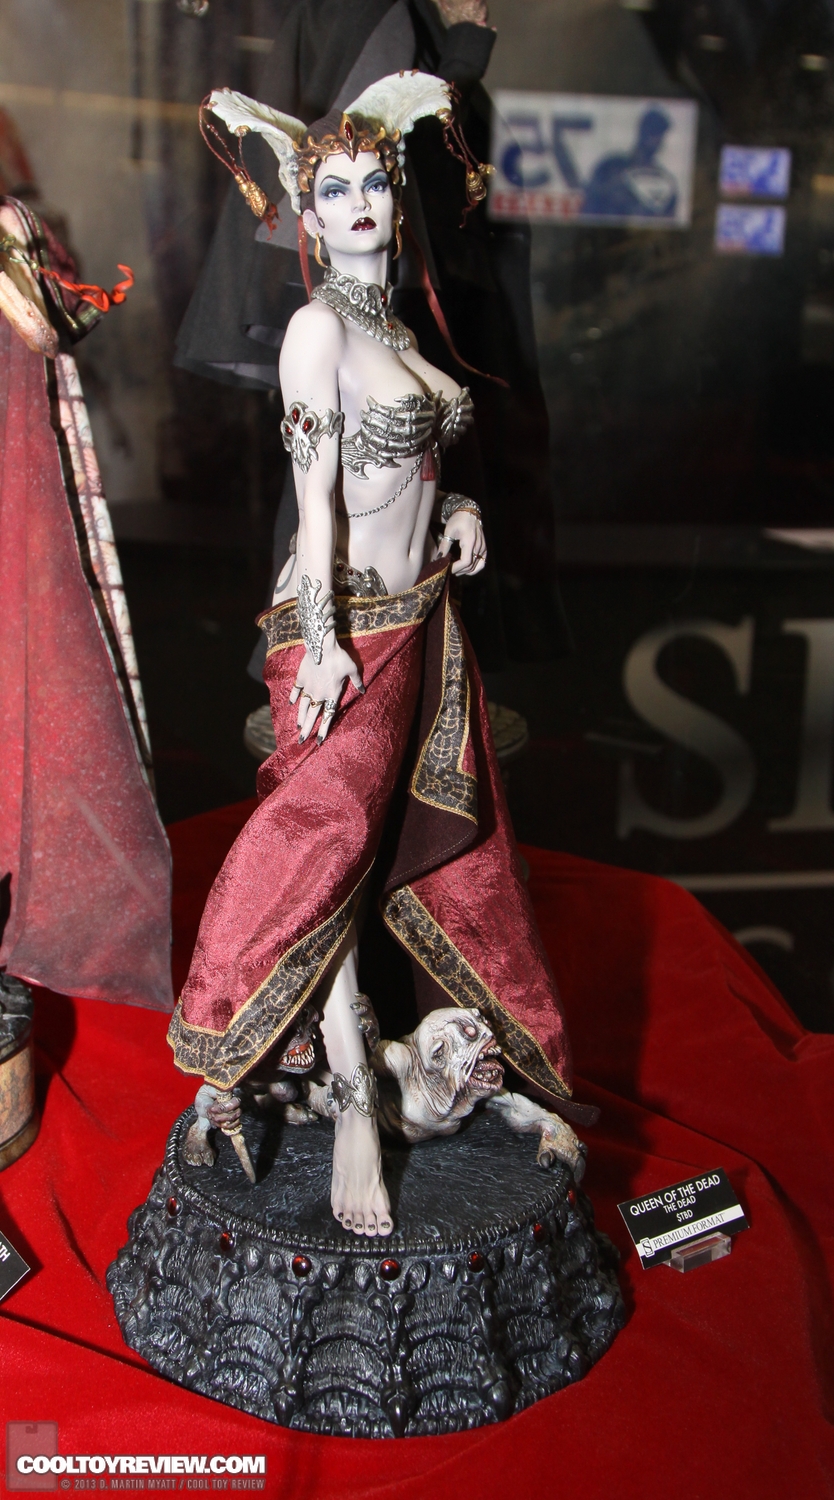 SDCC_2013_Sideshow_Collectibles_Saturday-086.jpg